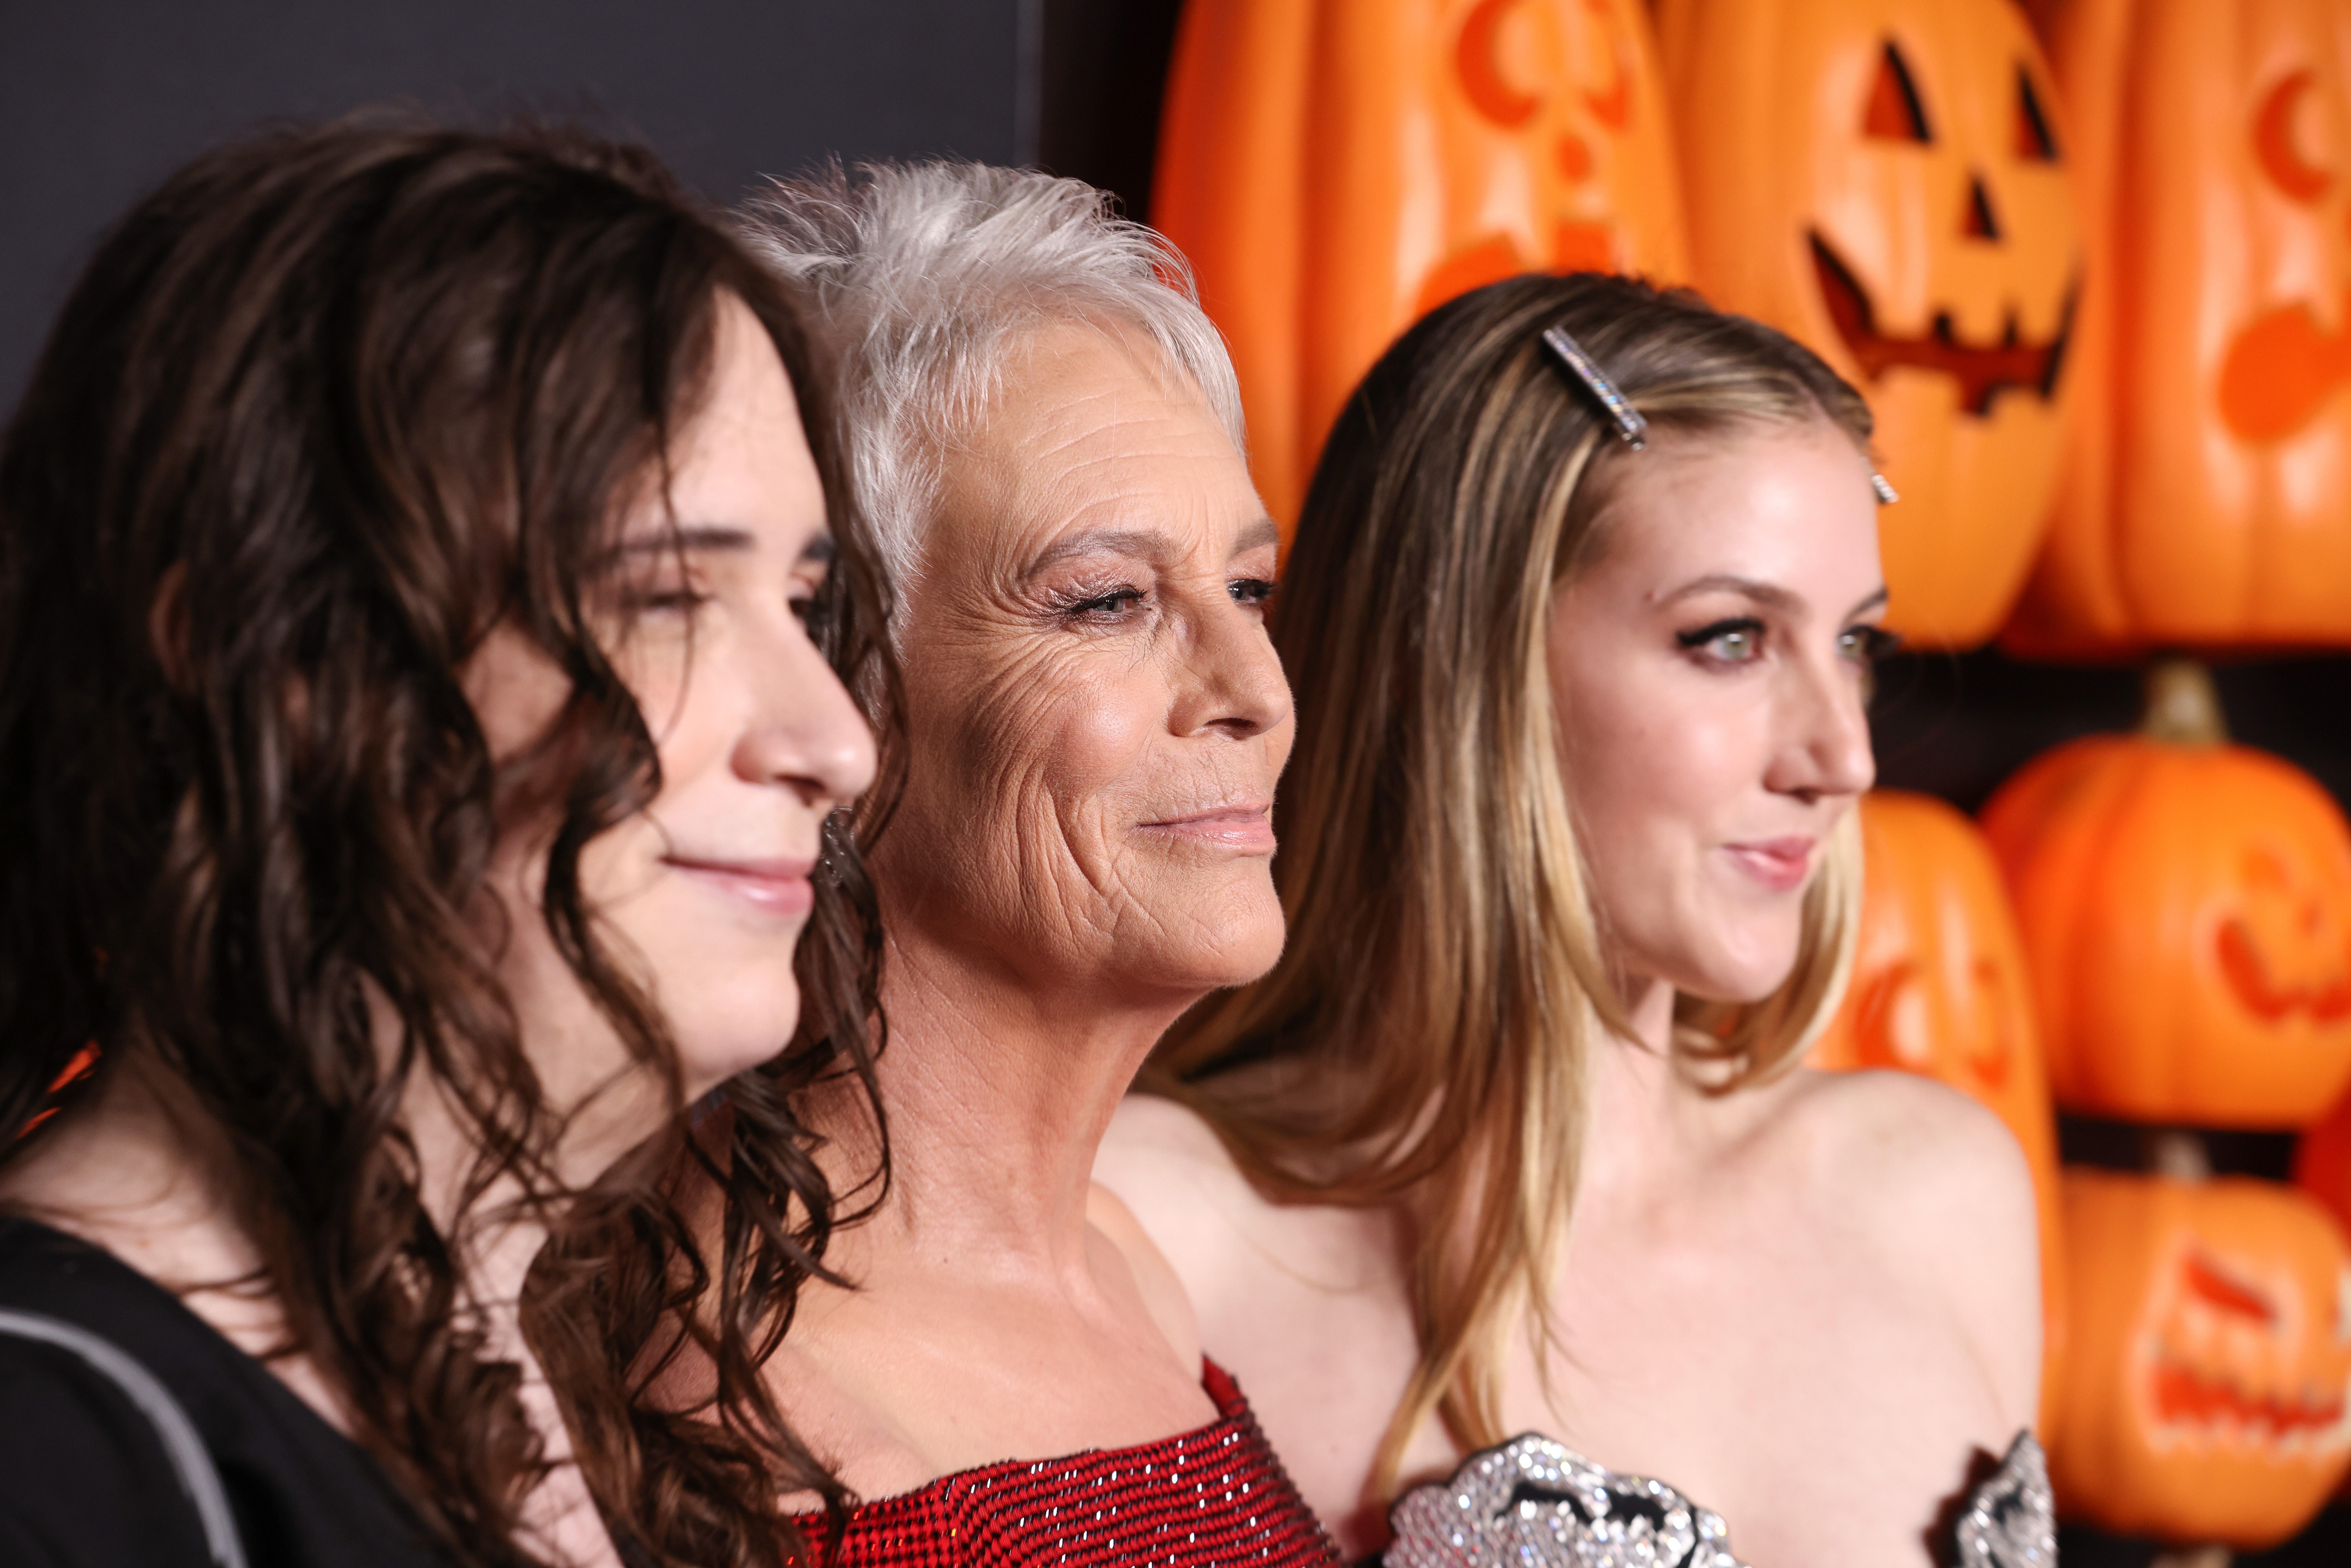 Ruby Guest, Jamie Lee Curtis and Annie Guest at the premiere of "Halloween Ends" held at TCL Chinese Theatre on October 11, 2022, in Los Angeles, California | Source: Getty Images